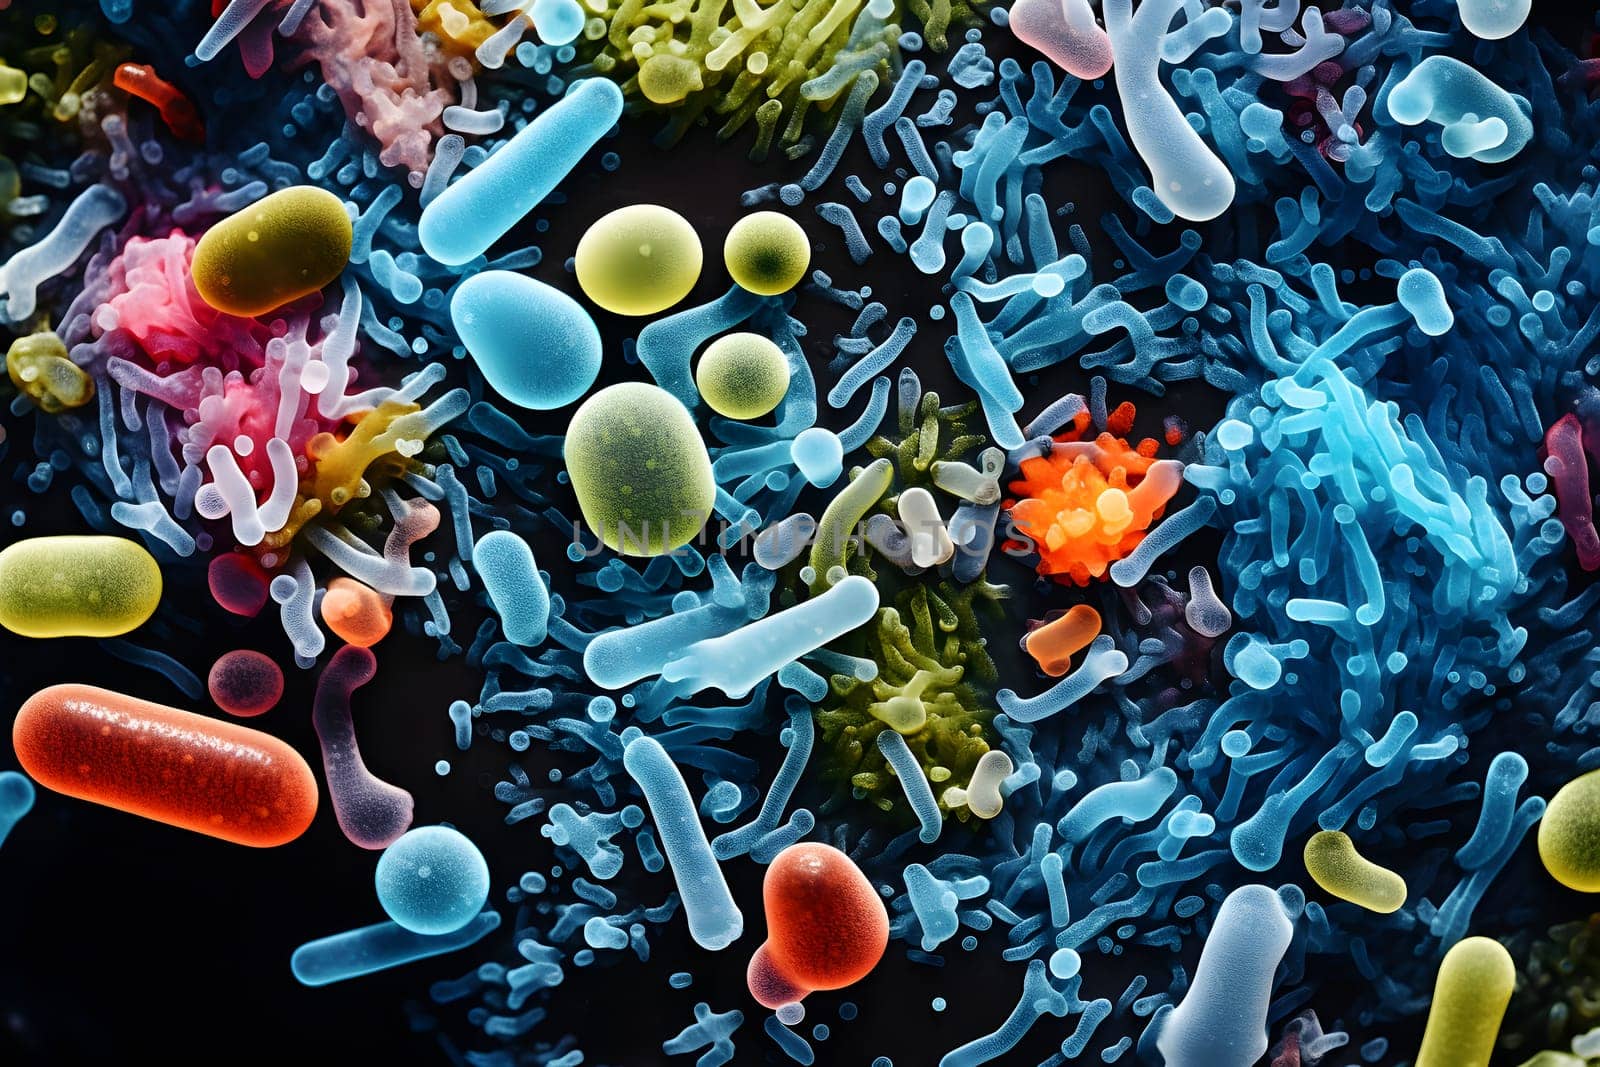 cells, bacteria and microorganisms magnified under a microscope. Every organism looks exactly like the miniature world inside us